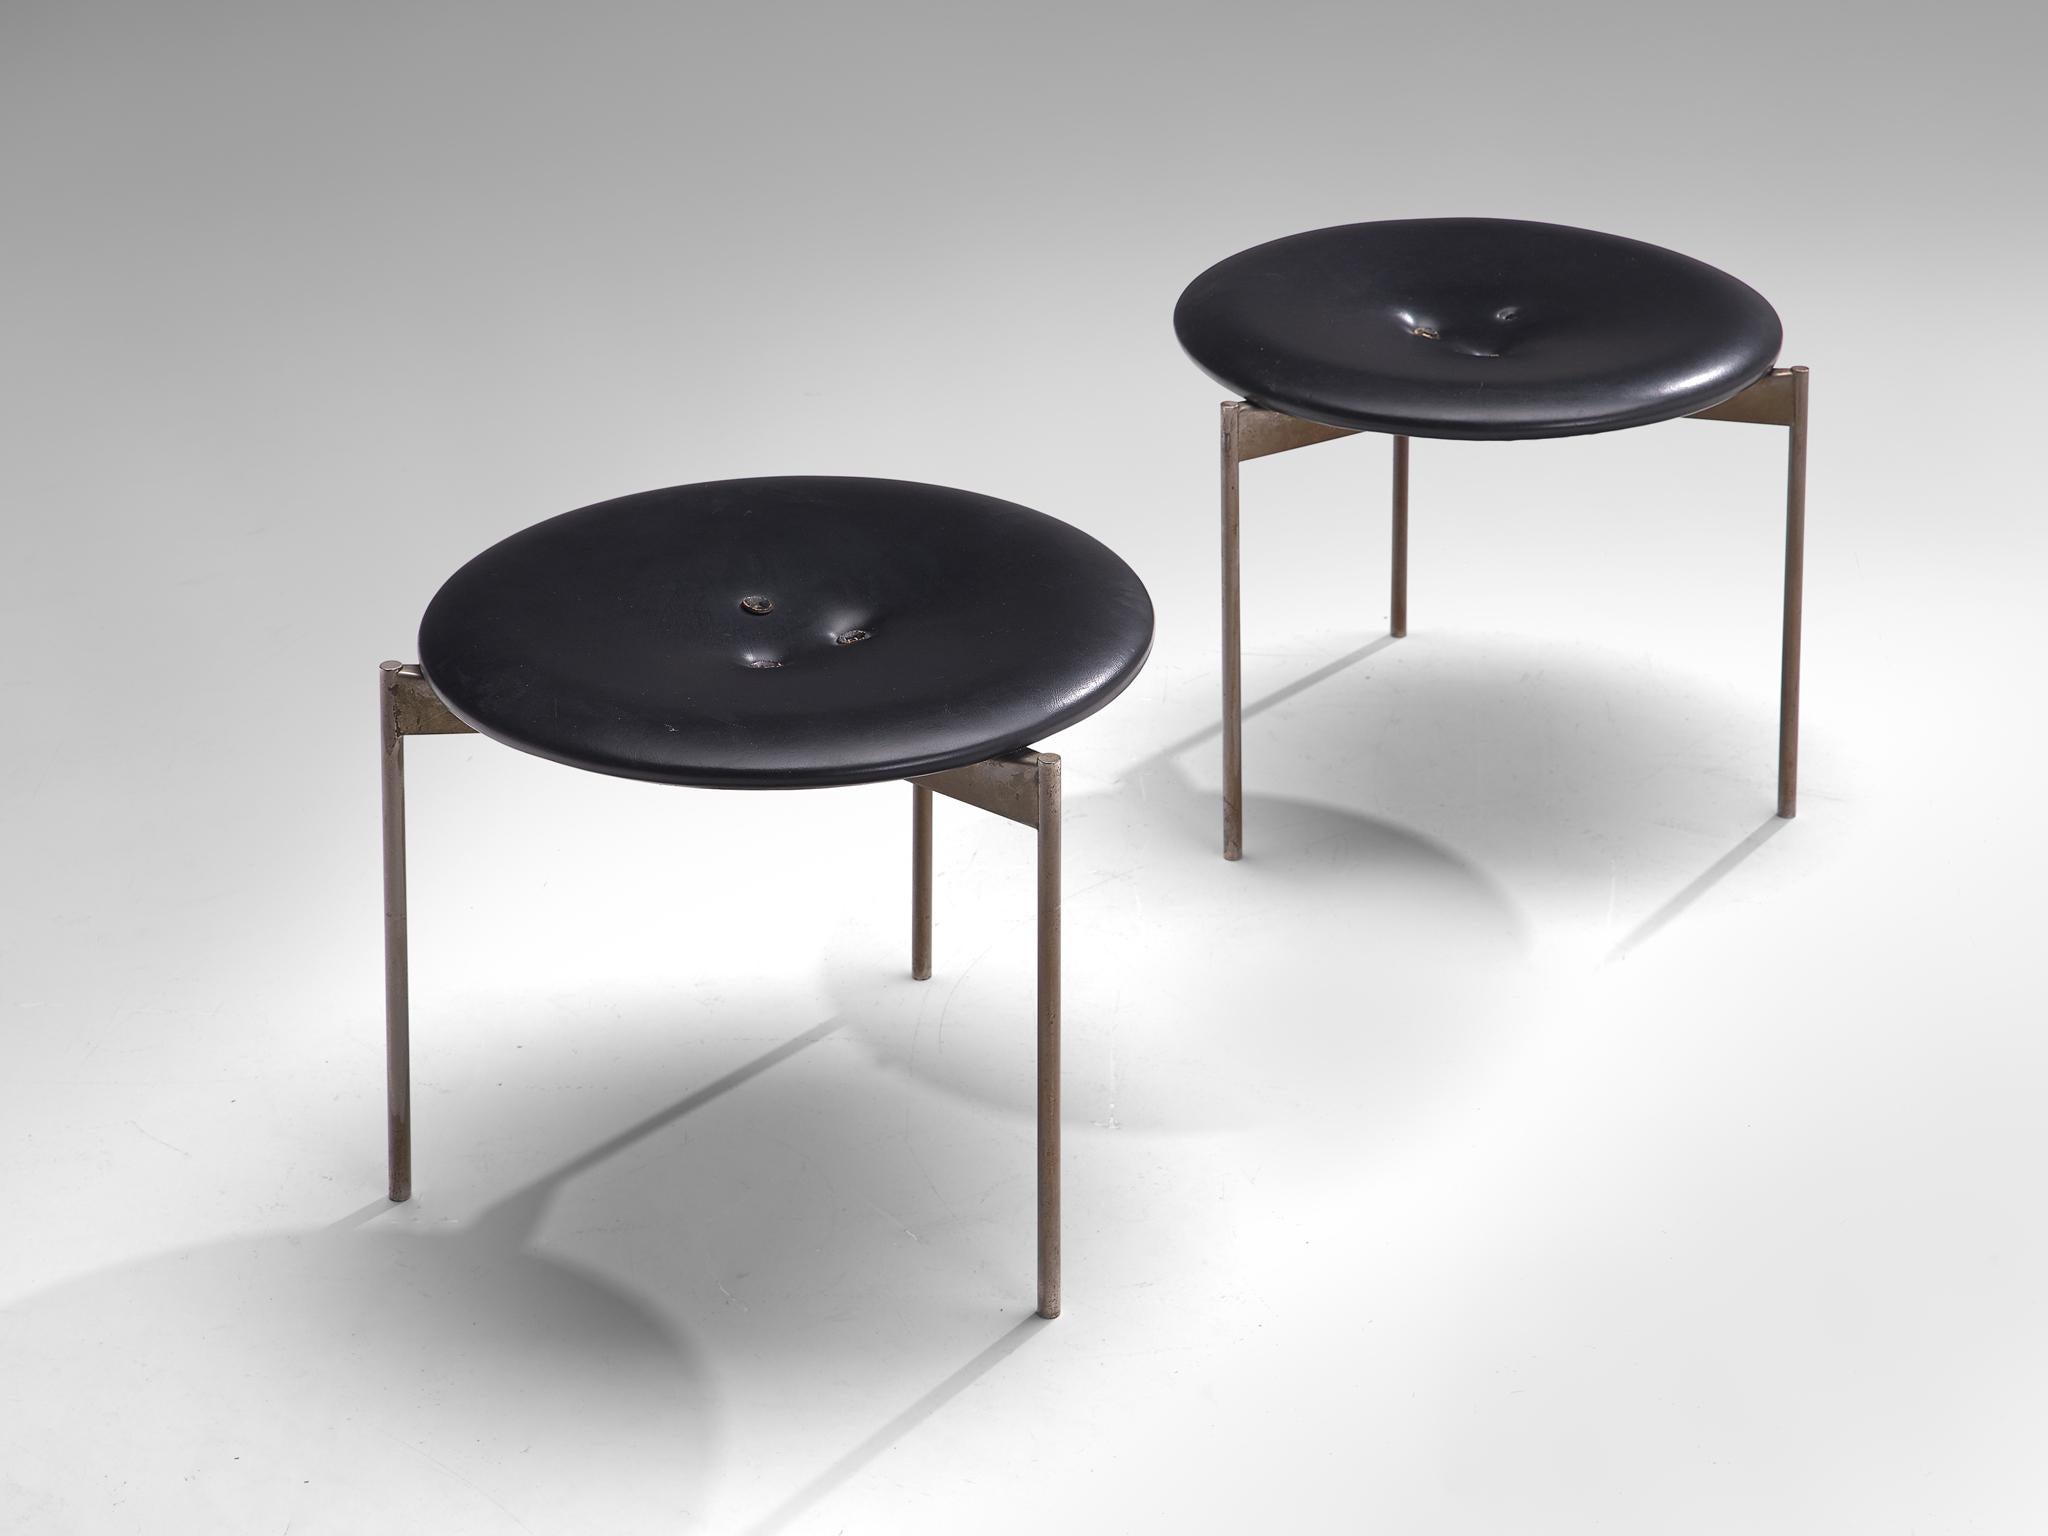 Uno & Östen Kristiansson for Luxus, pair of stools, steel and leather, Sweden, 1960s.

A Midcentury Modern set of two low stools that are designed by the duo Uno & Östen Kristiansson. This Swedish seats were produced by Luxus, featuring the edition